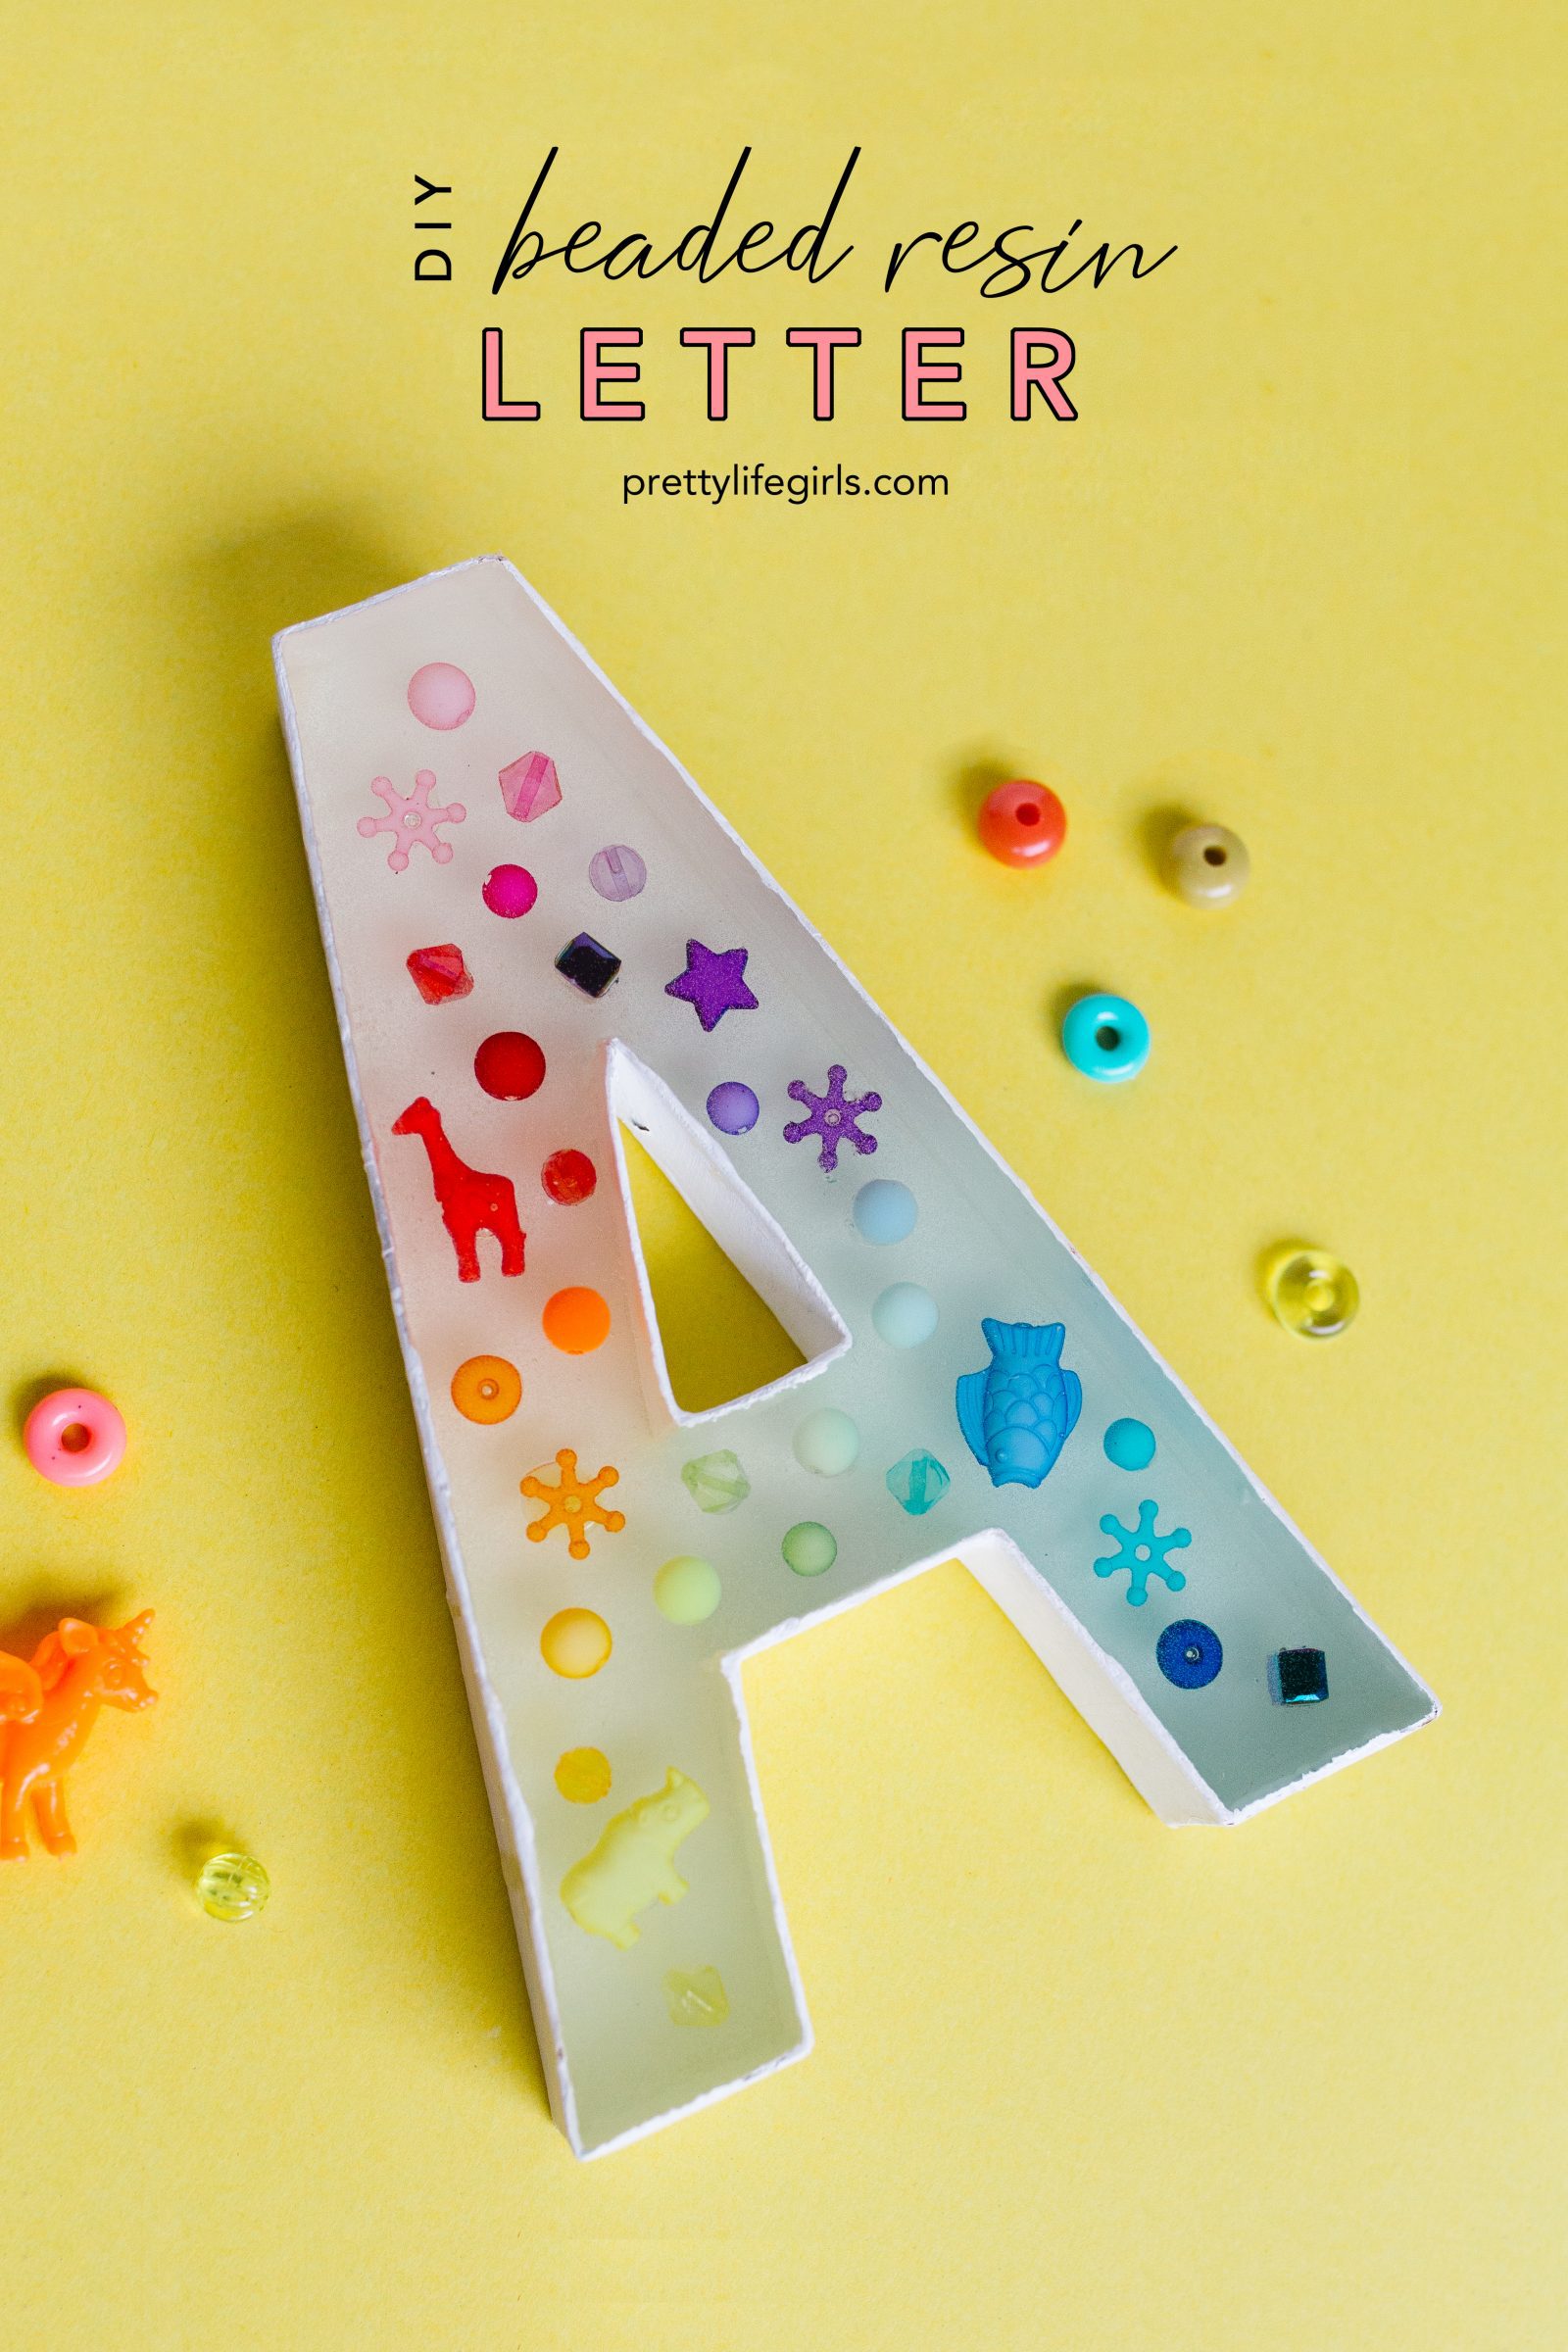 How To Make a DIY Beaded Resin Letter + a tutorial featured by Top US Craft Blog + The Pretty Life Girls